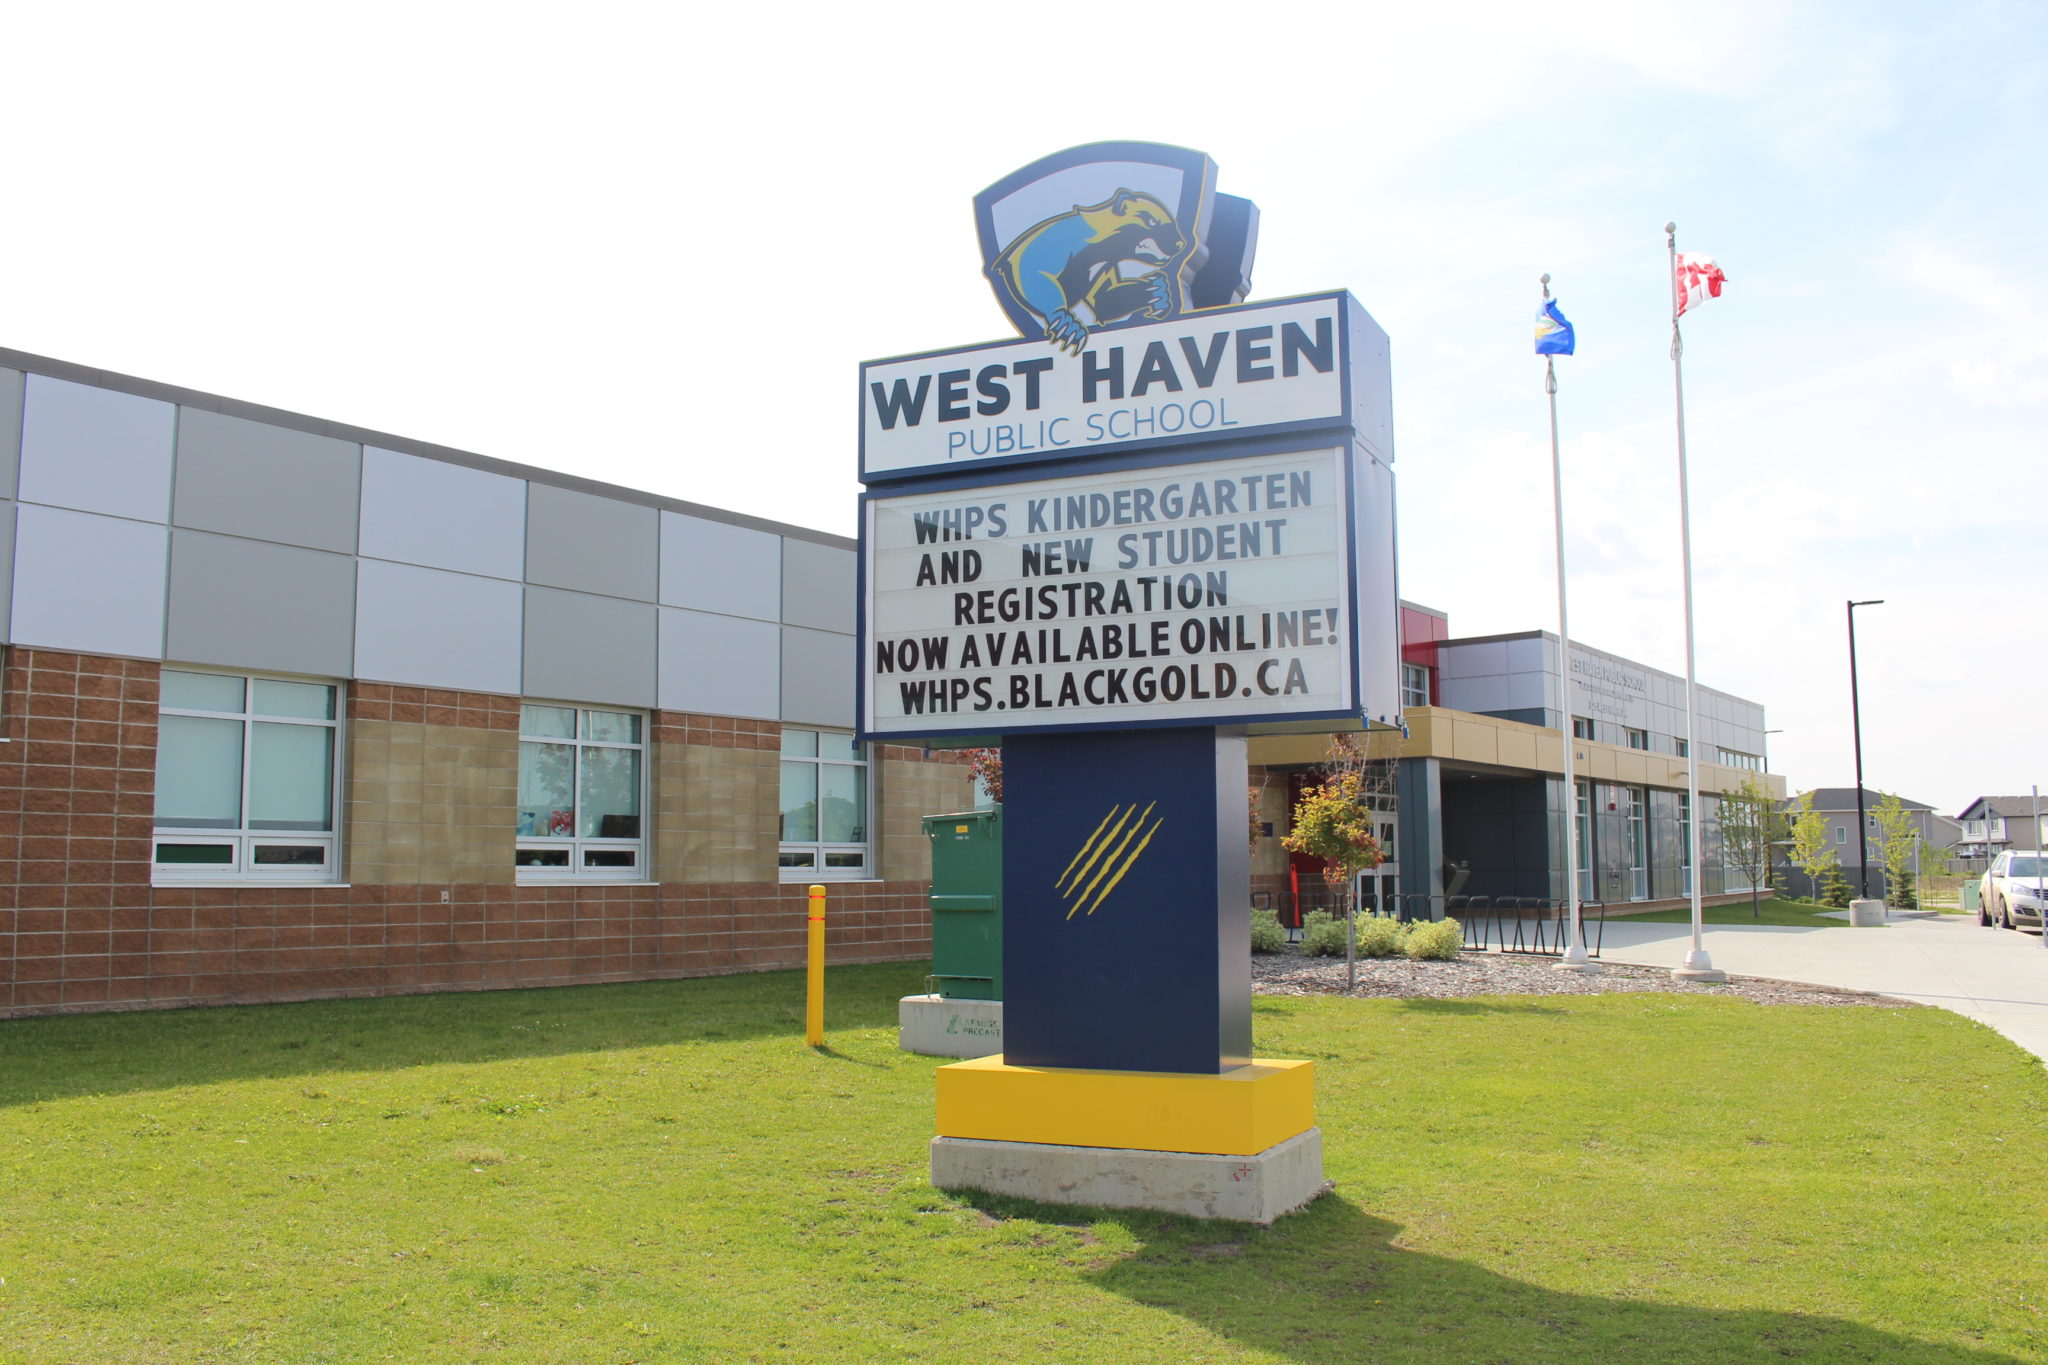 The school pylon sign at West Haven School in Leduc. Move to the City of Leduc and discover life here.